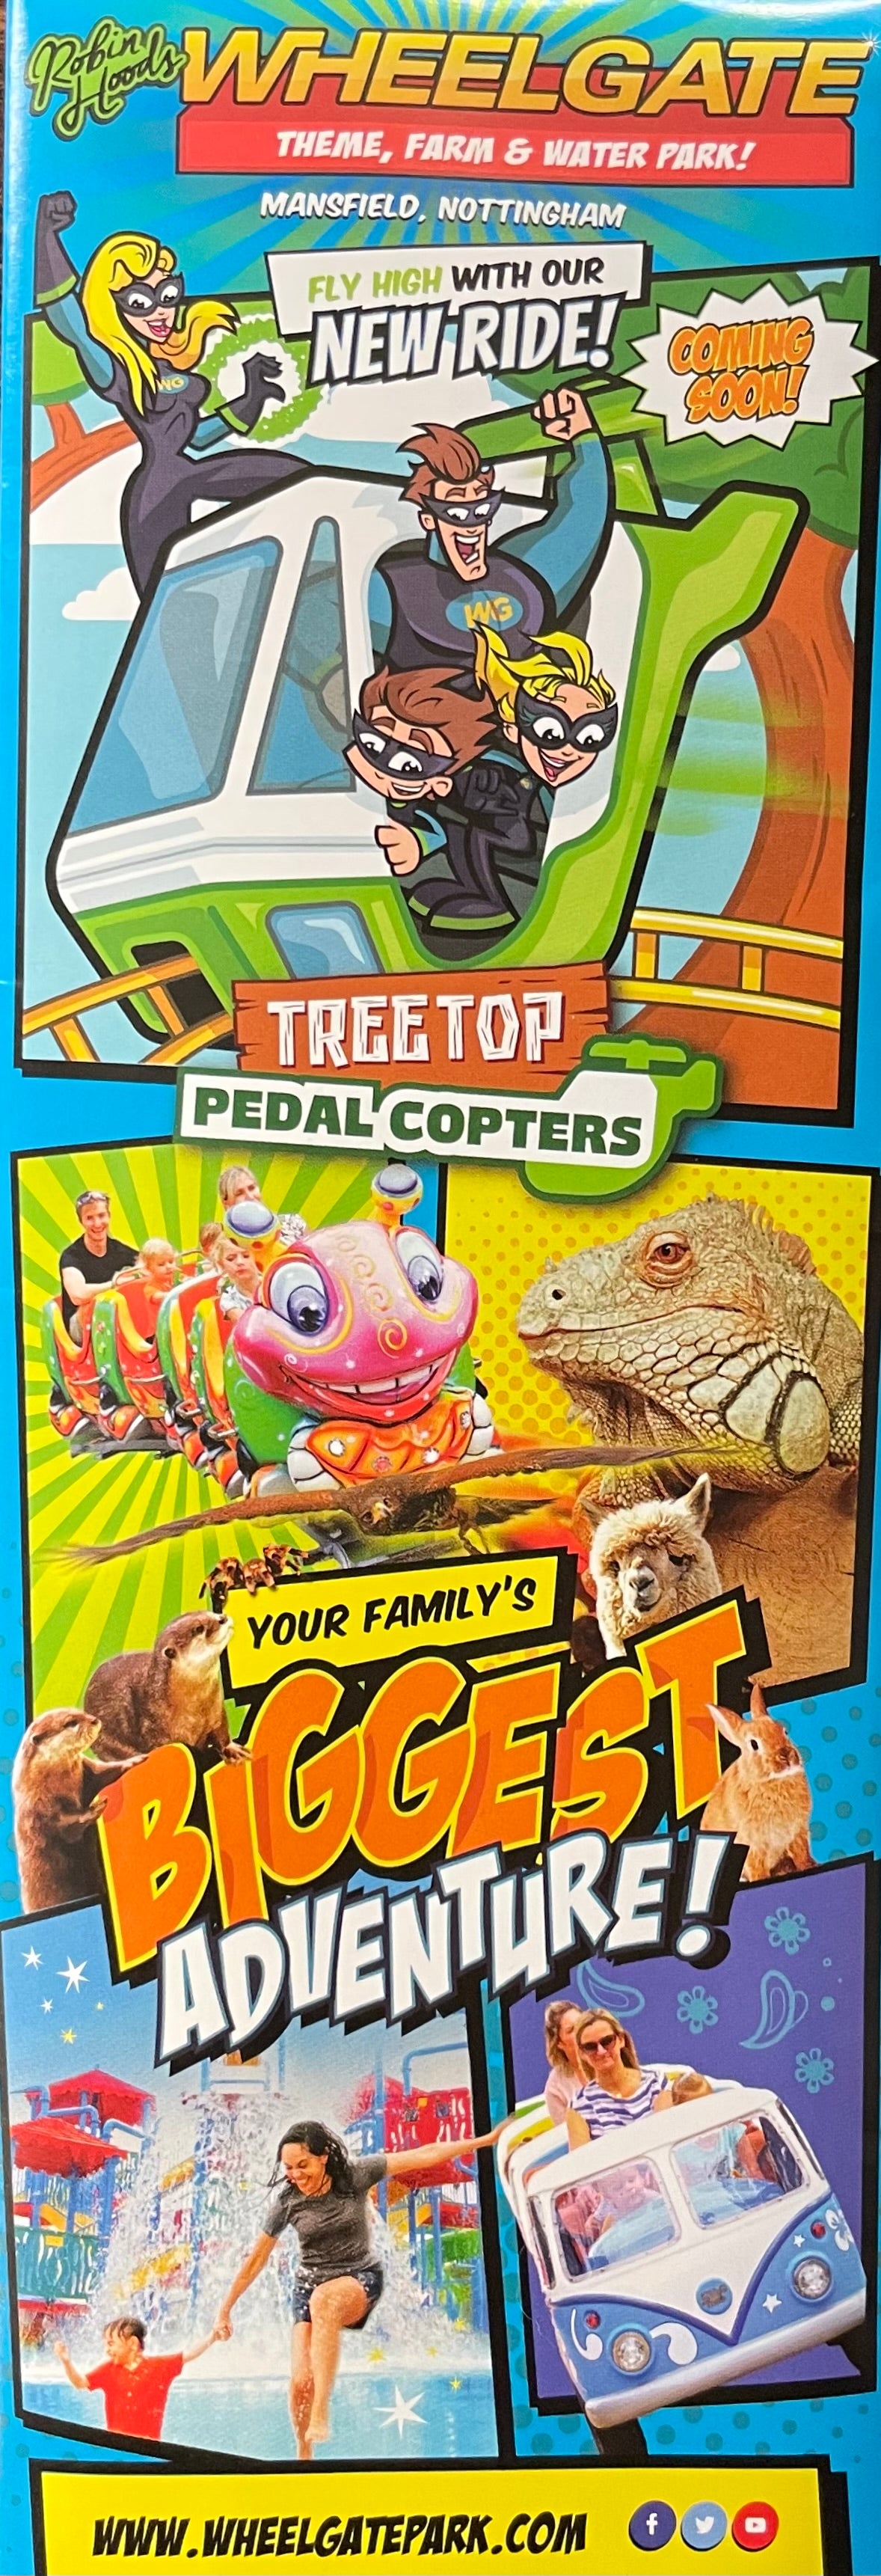 WheelGate -  Theme, Farm & Water Park -	Tree Top Pedal Copters - Your Family's Biggest adventure!